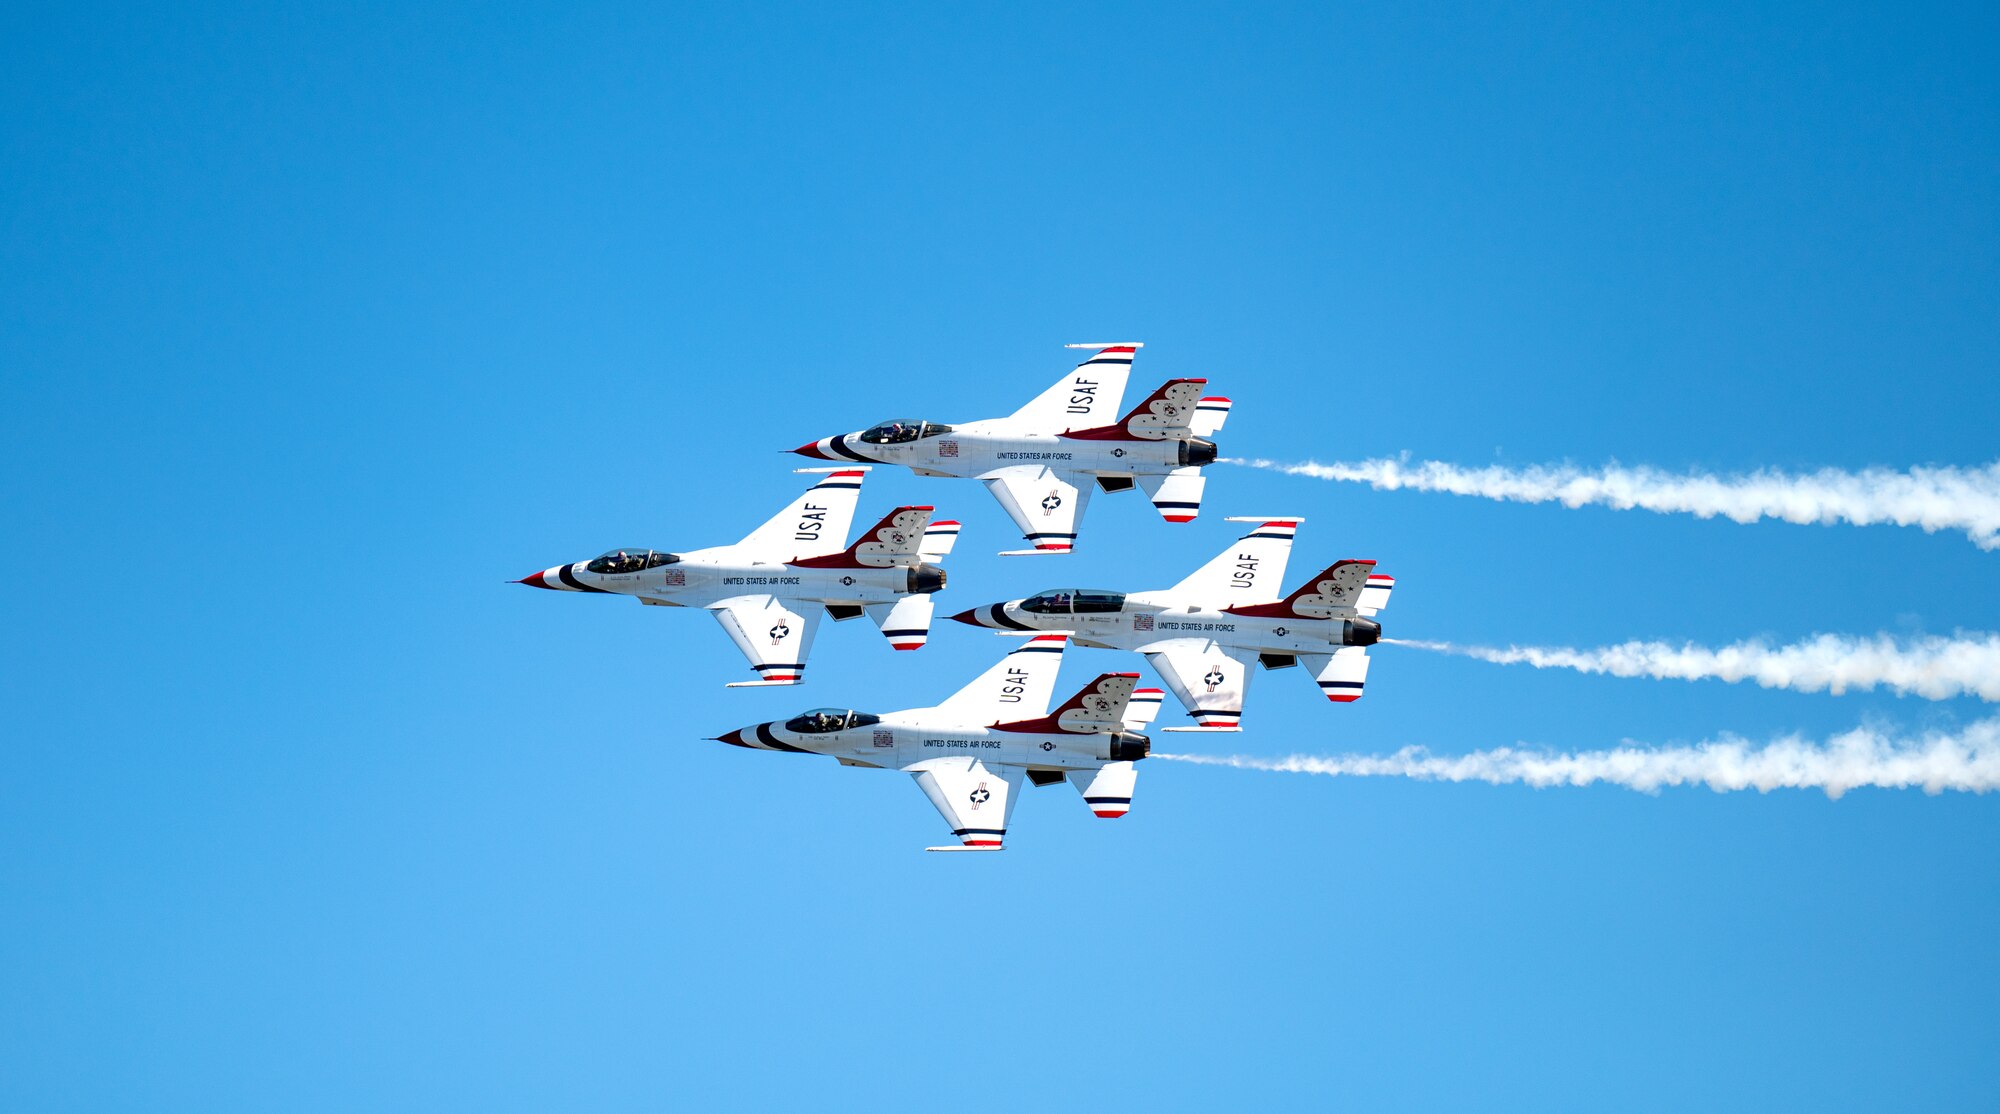 The Thunderbirds fly in diamond formation during a practice session for the 2023 Thunder Over the Sound Air and Space Show at Biloxi Beach in Biloxi, Mississippi, April 28, 2023. Thunder Over the Sound is a unique event where a military installation and its surrounding city jointly host an air show in two locations; Biloxi Beach and Keesler's flightline. (U.S. Air Force photo by Airman 1st Class Trenten Walters)